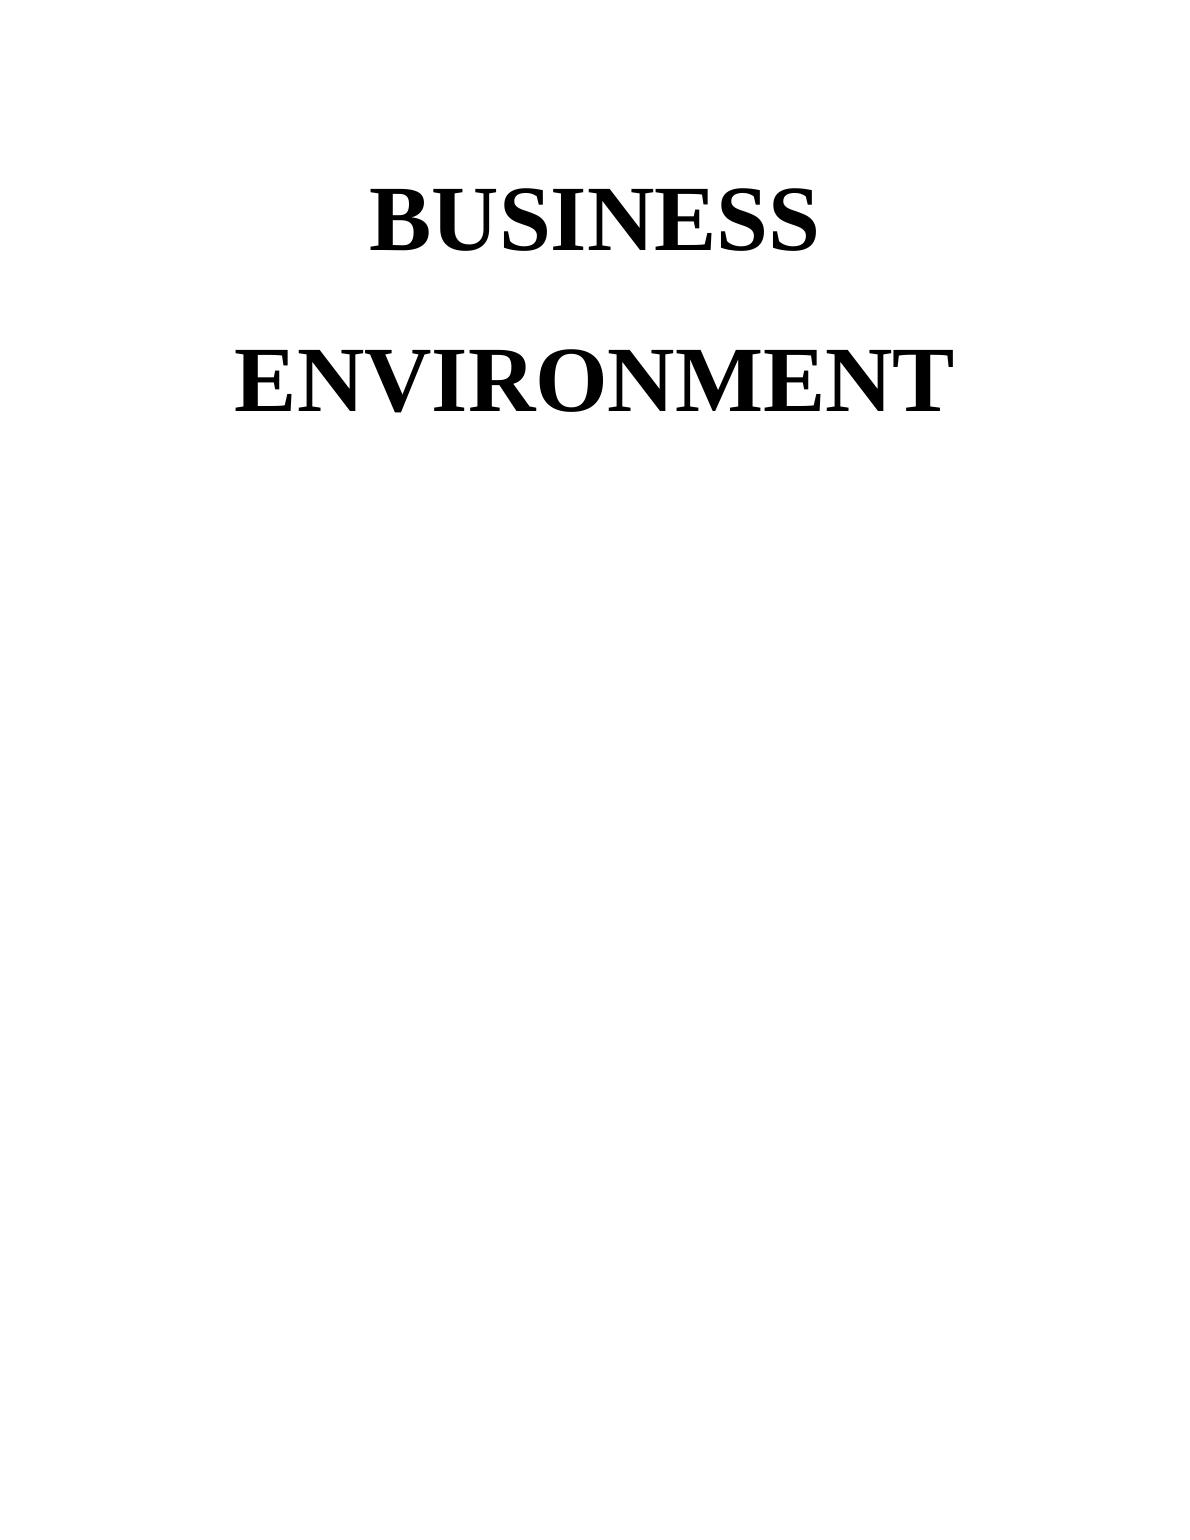 Business Environment Assignment (BE)- Thomas Cook Plc_1